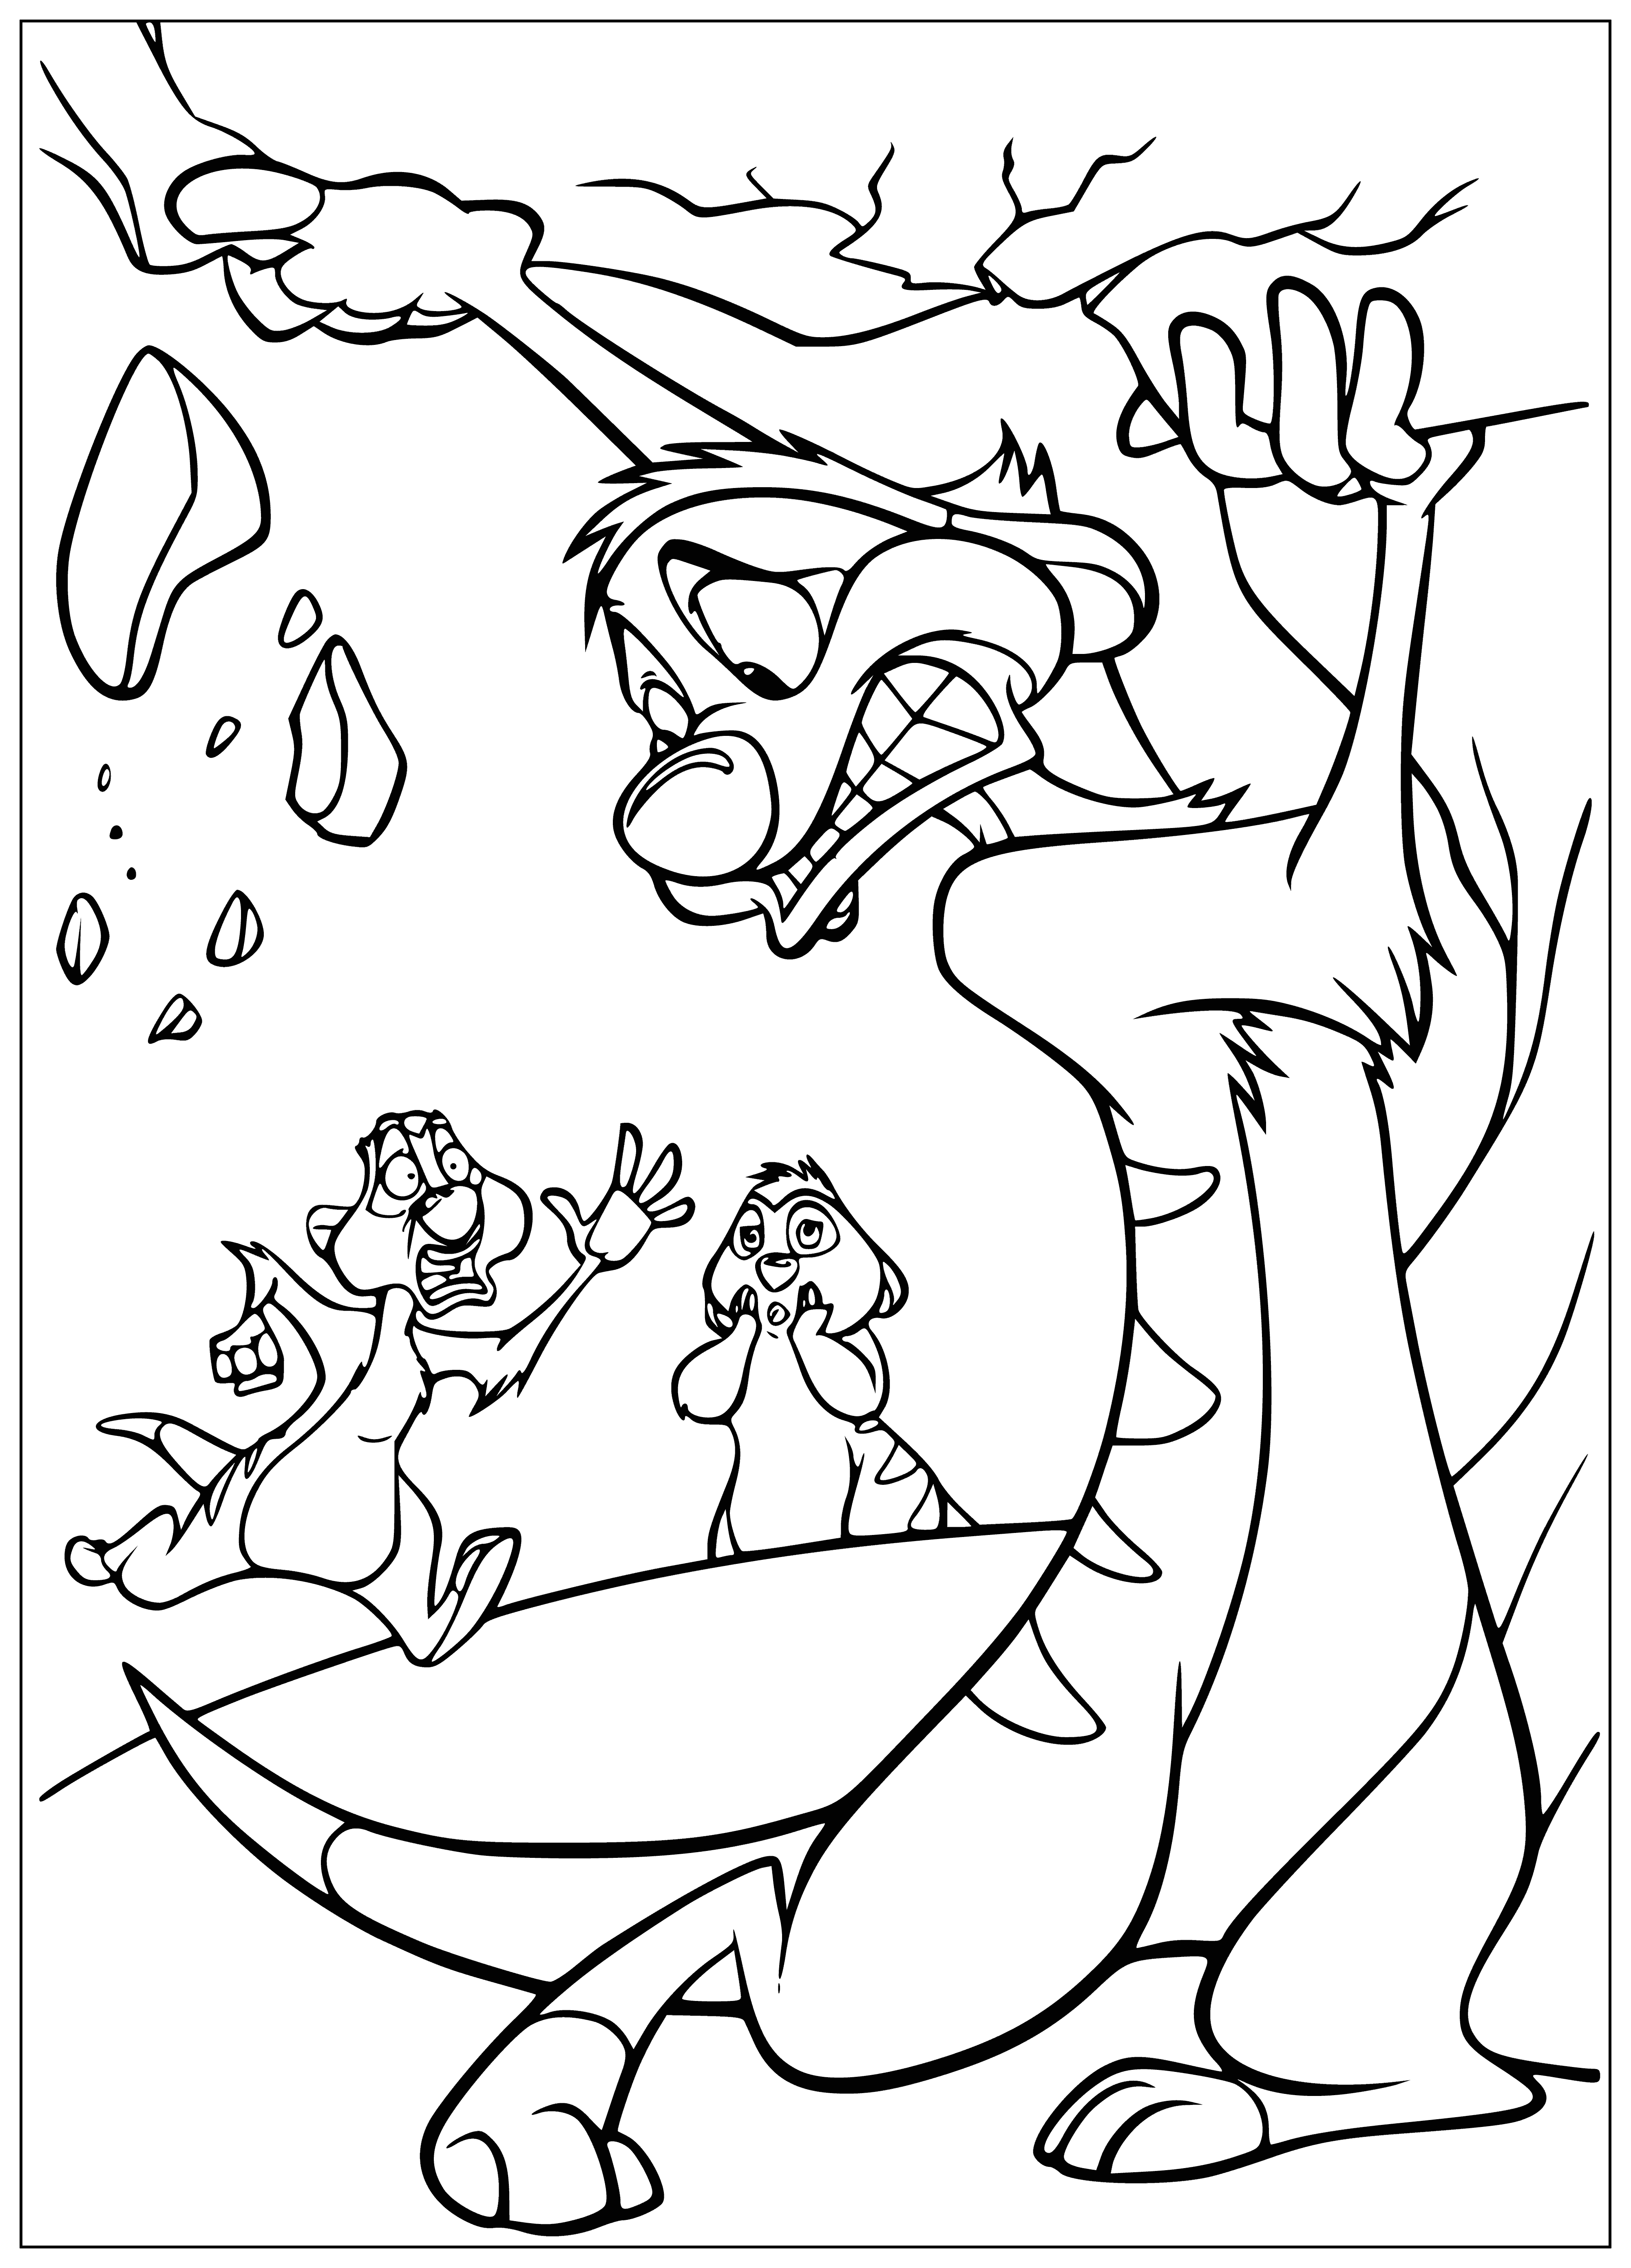 coloring page: The lion is disappointed while Timon looks triumphant as the rodent-like creature stands on the lion's tongue in the coloring page.